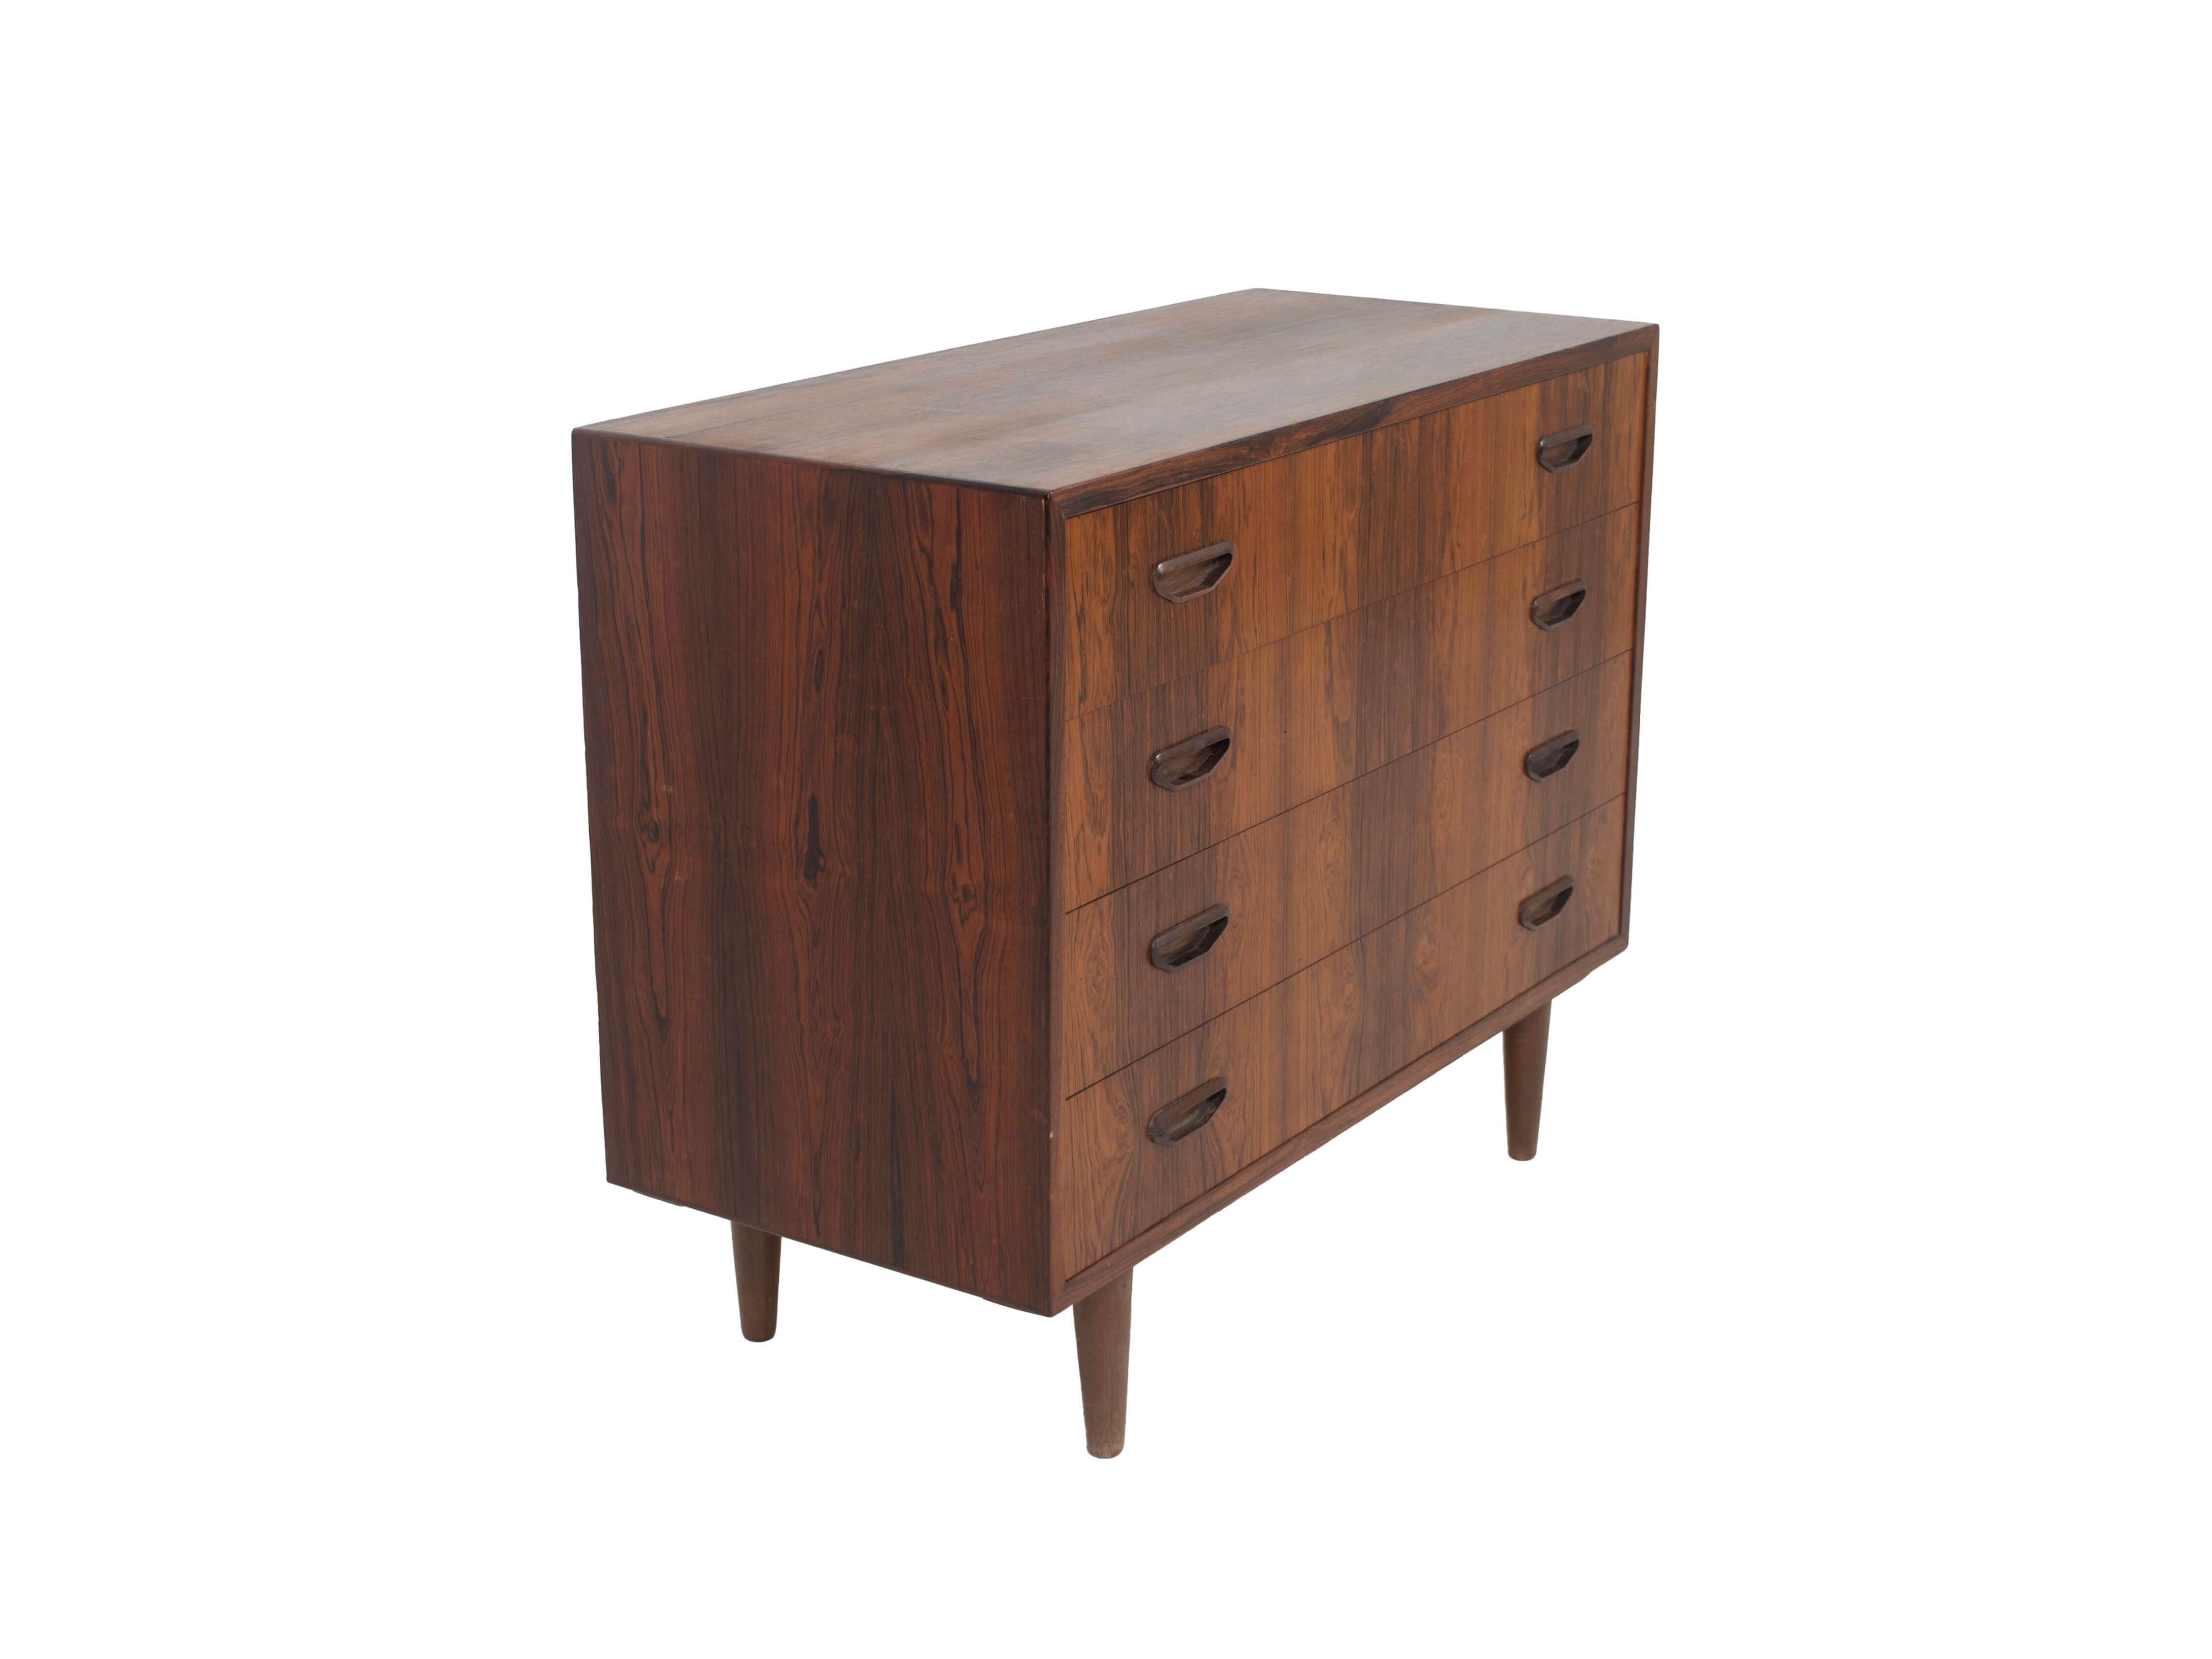 Mid-20th Century Danish Vintage Chest of Drawers by P. Westergaards Møbelfabrik, 1960s